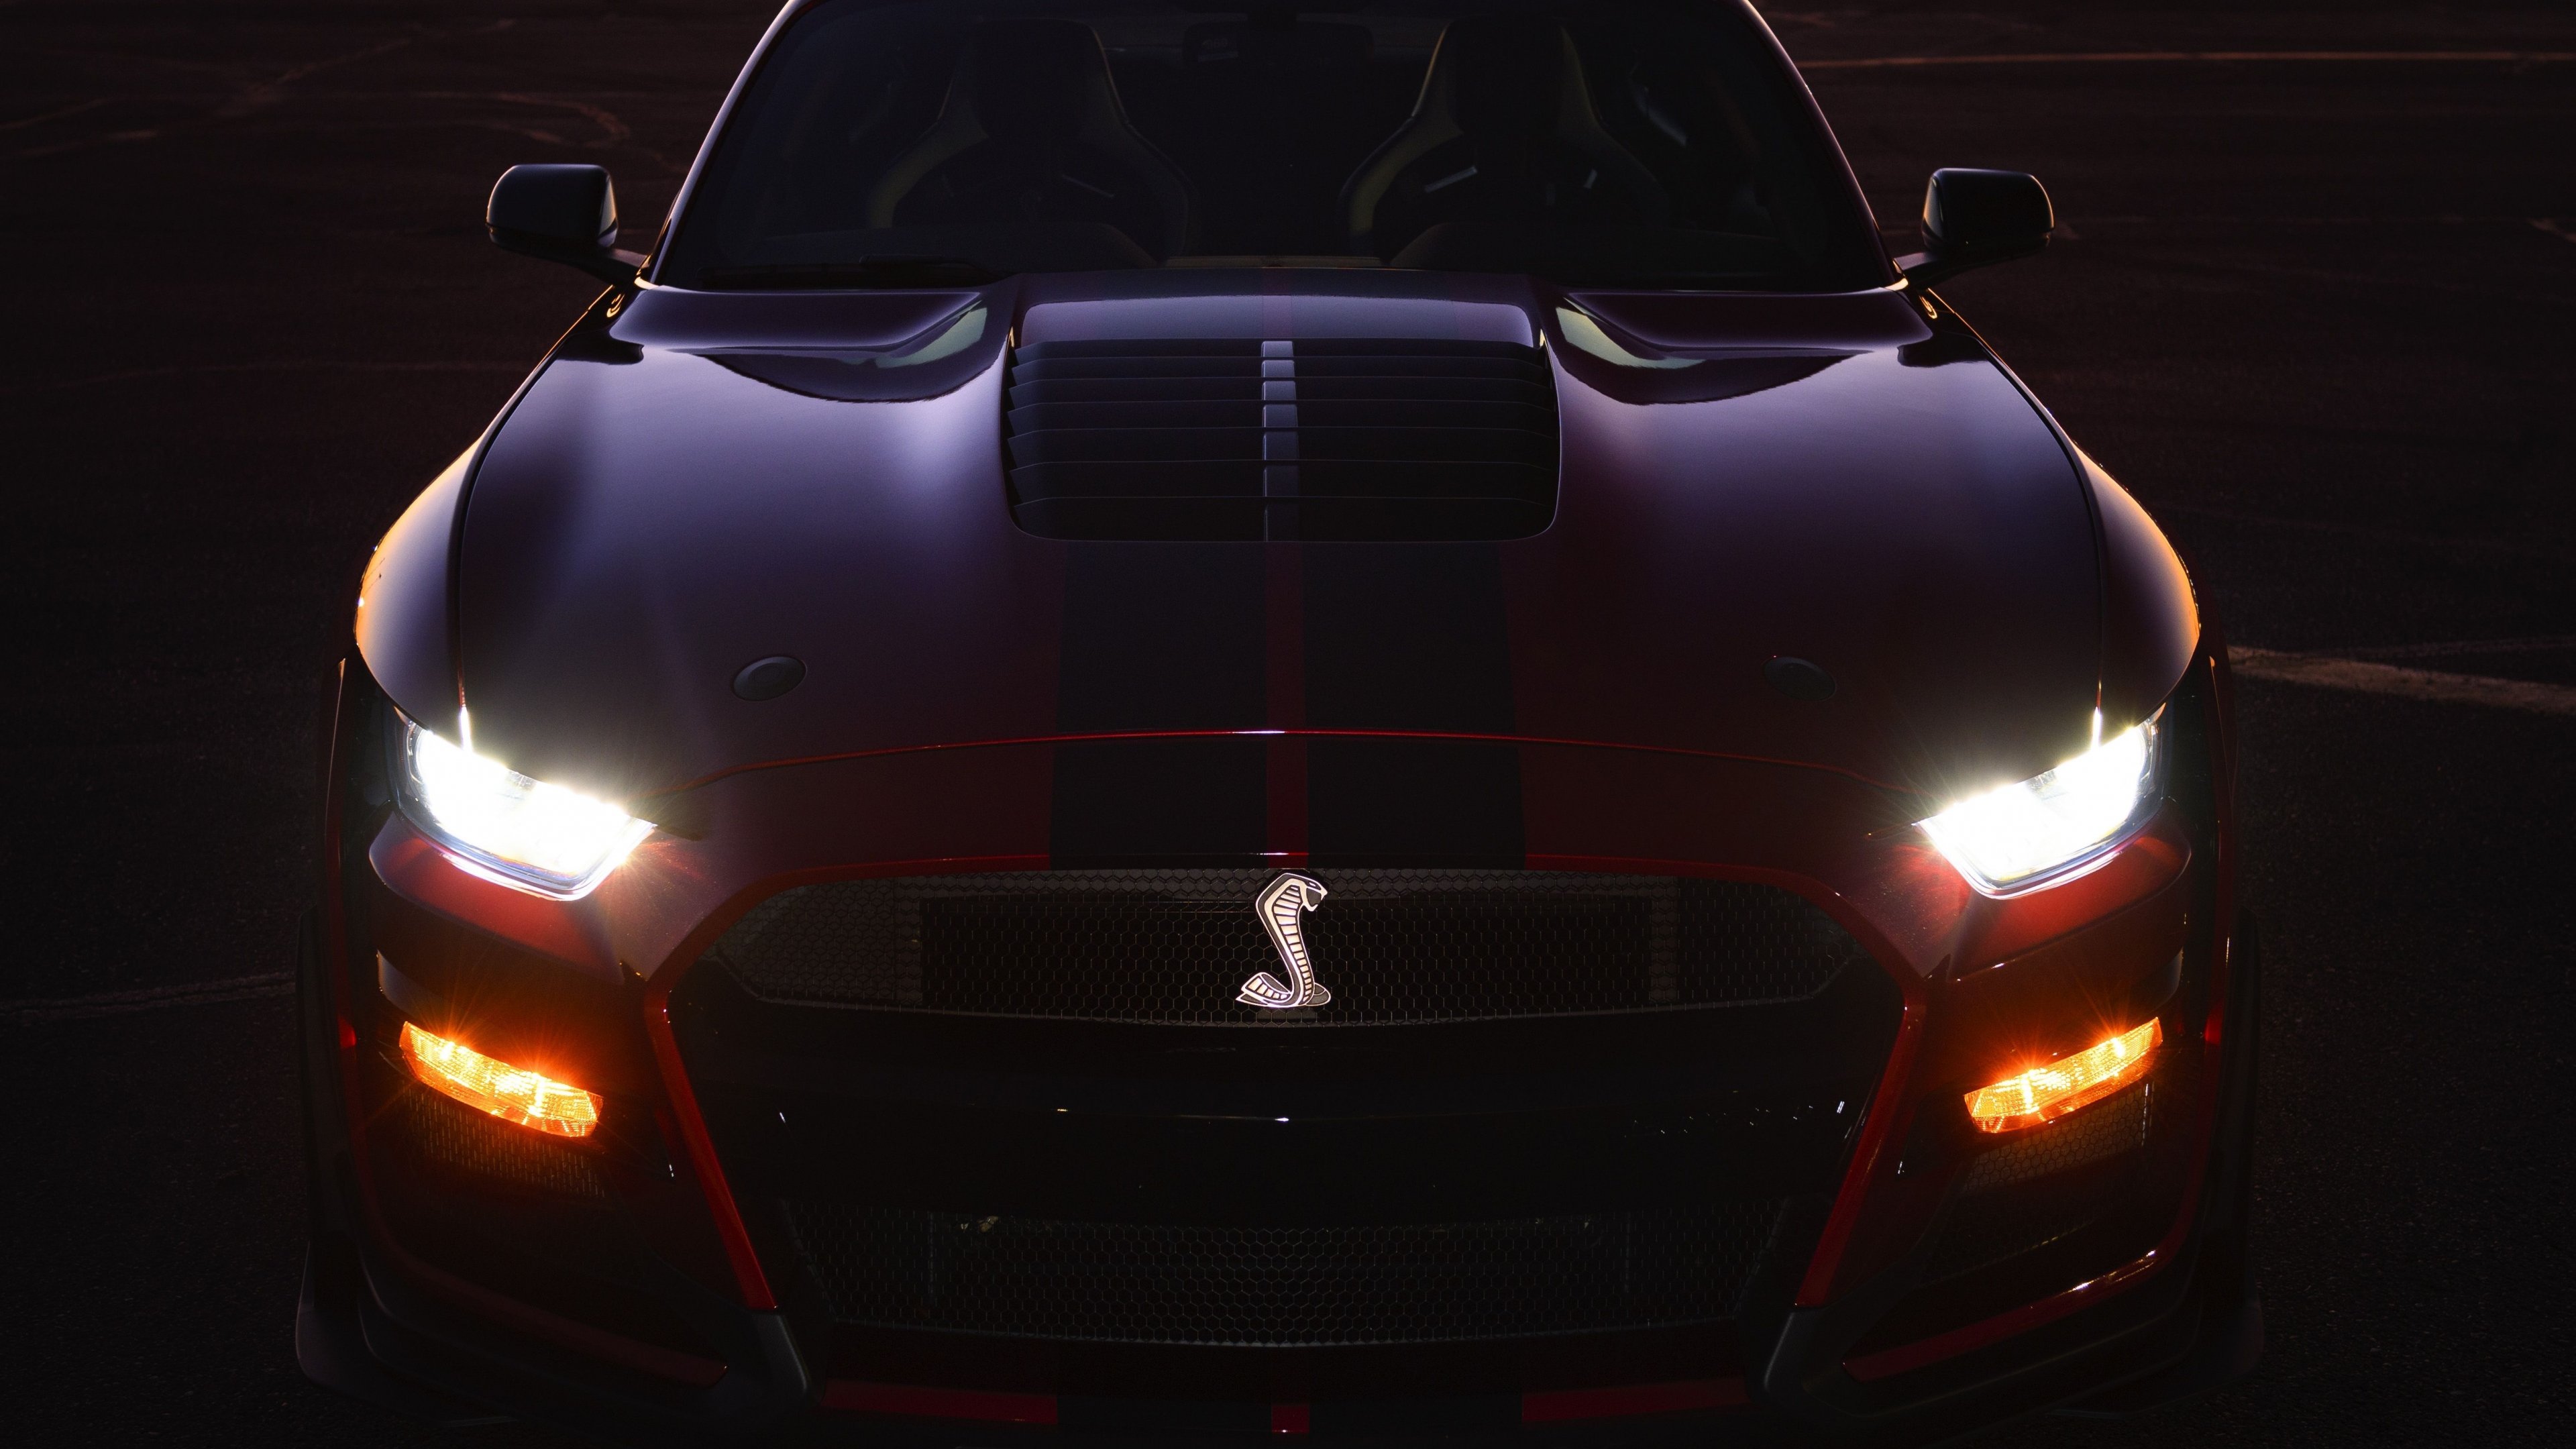 Download wallpaper 3840x2160 2020 car, ford mustang shelby gt500, dark,  muscle car 4k wallpaper, uhd wallpaper, 16:9 widescreen 3840x2160 hd  background, 26400